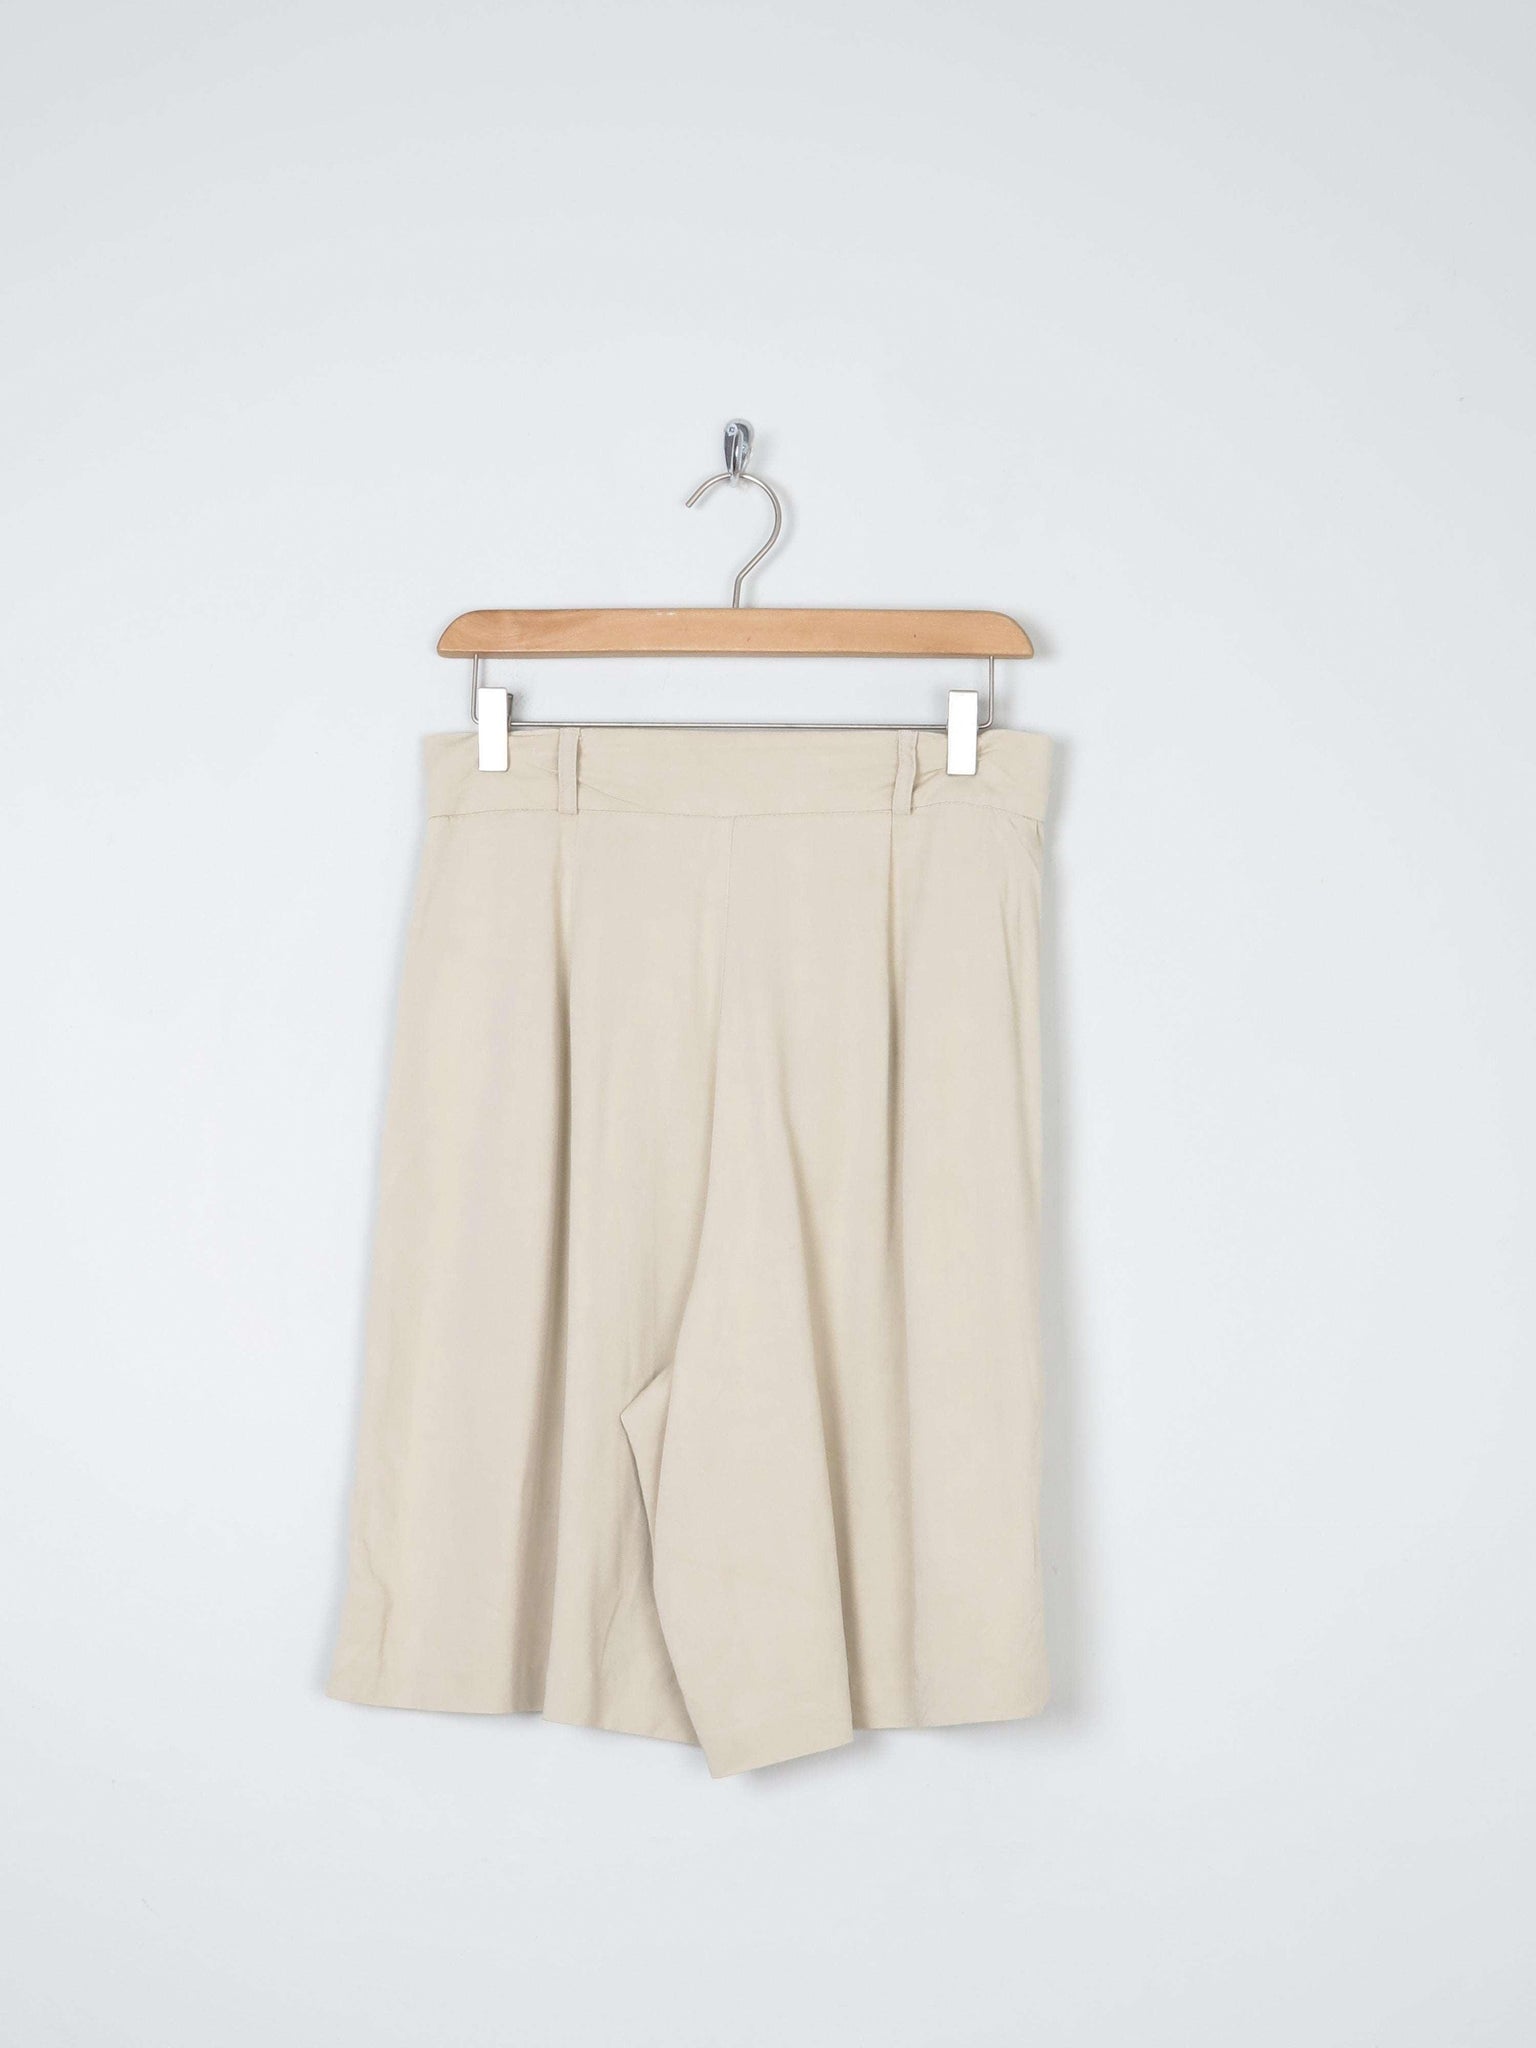 Beige/ Cream Long Flowing Shorts 10/12 - The Harlequin